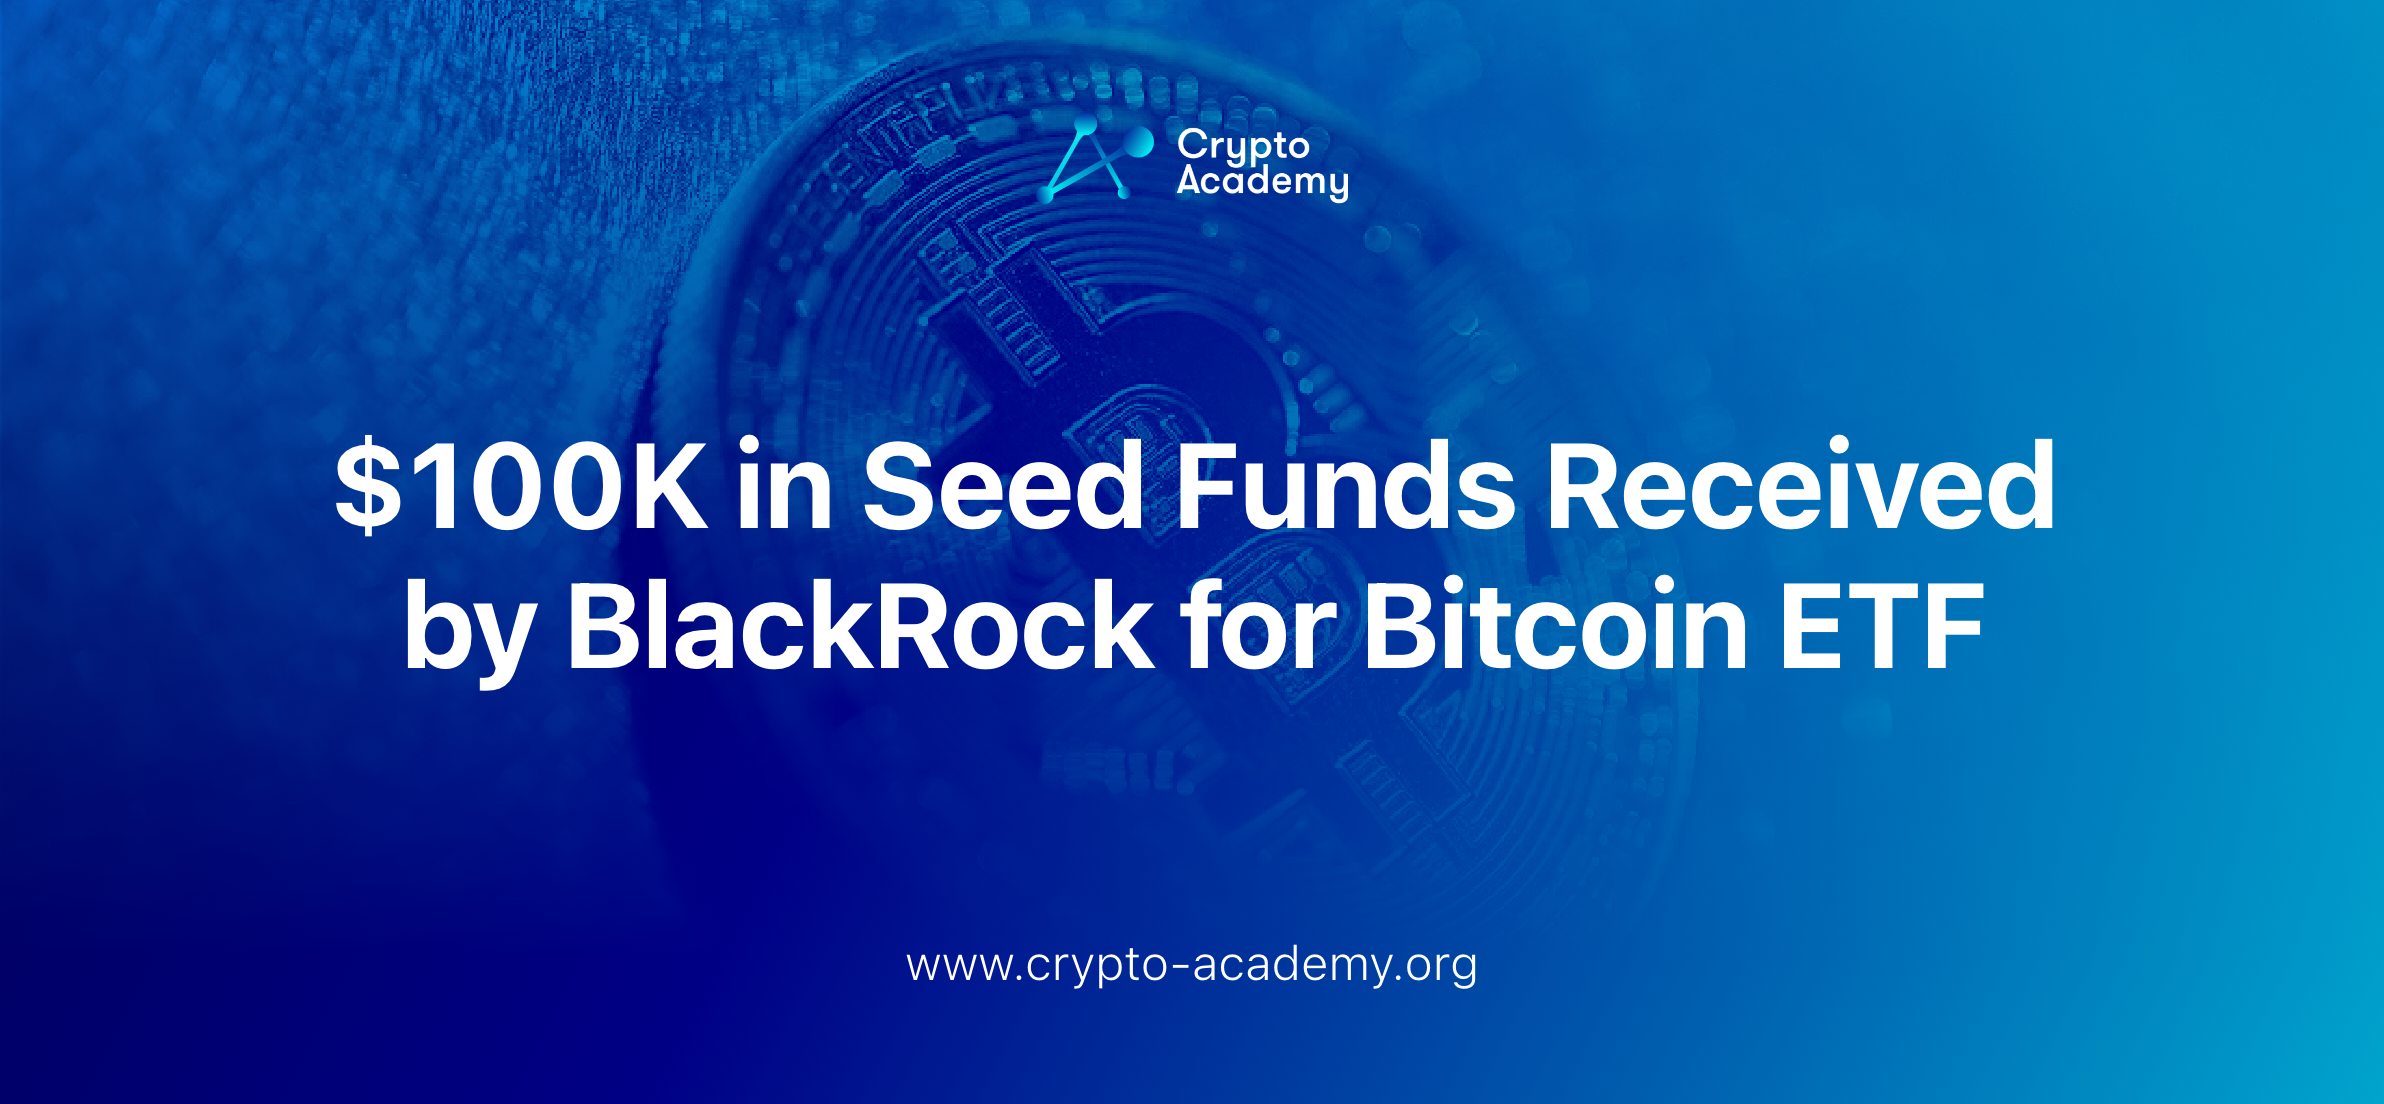 $100K in Seed Funds Received by BlackRock for Bitcoin ETF